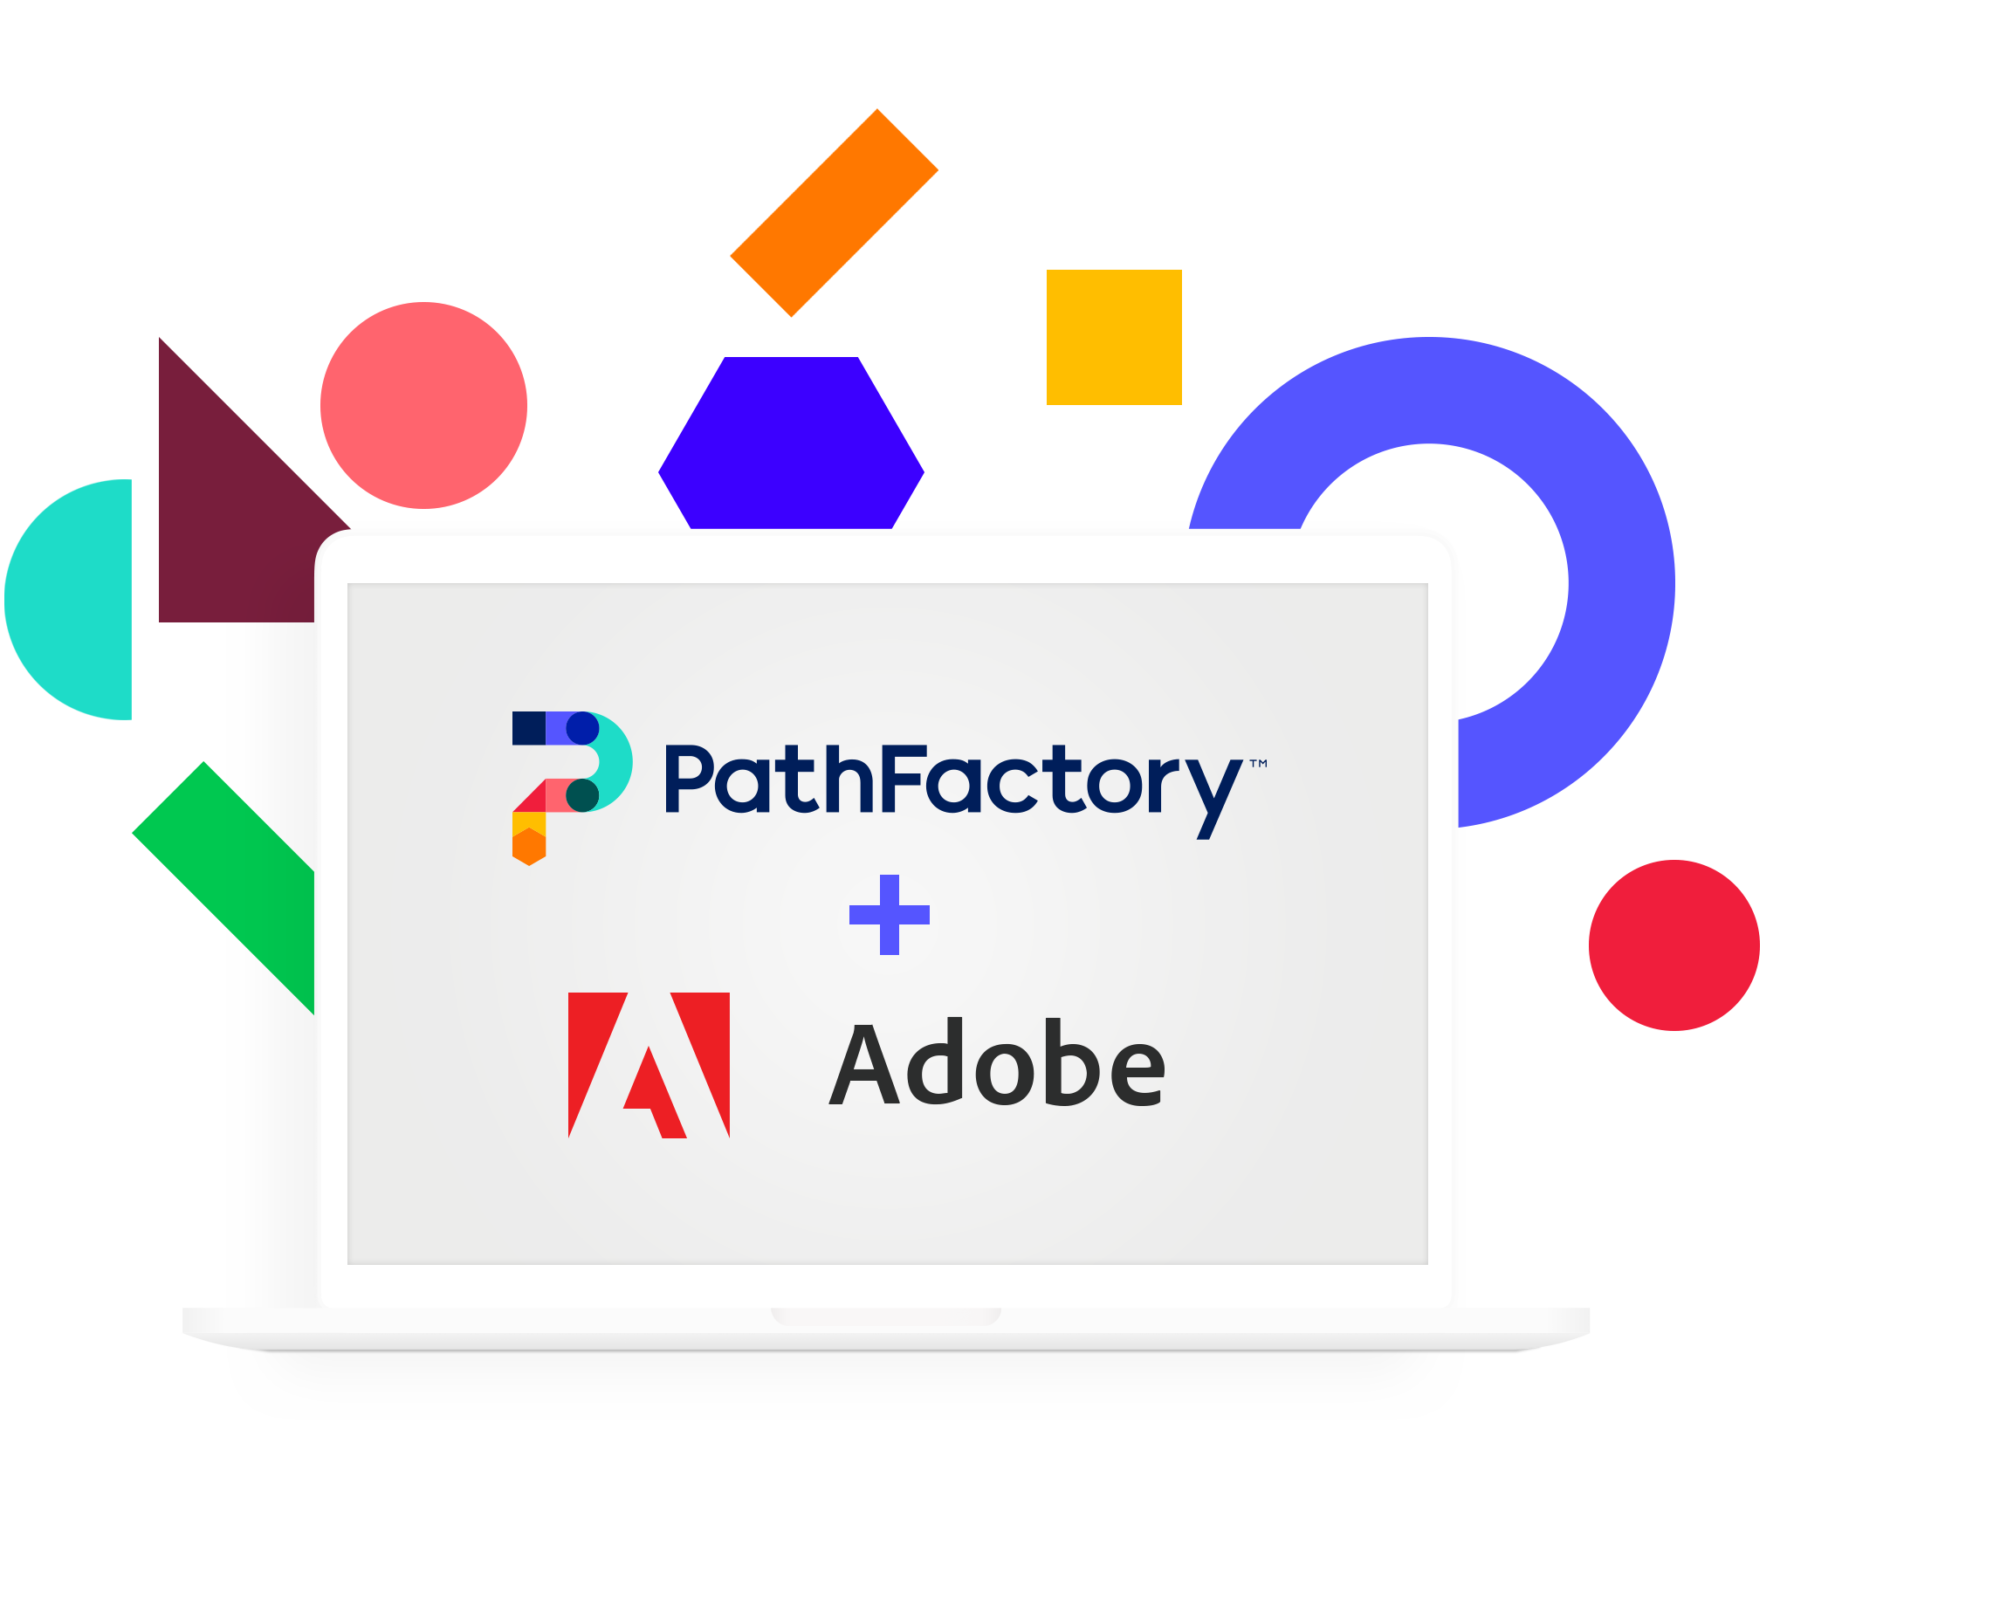 PathFactory and Adobe Logo's in an image of a laptop with a grey screen, colorful geometric shapes on a white background